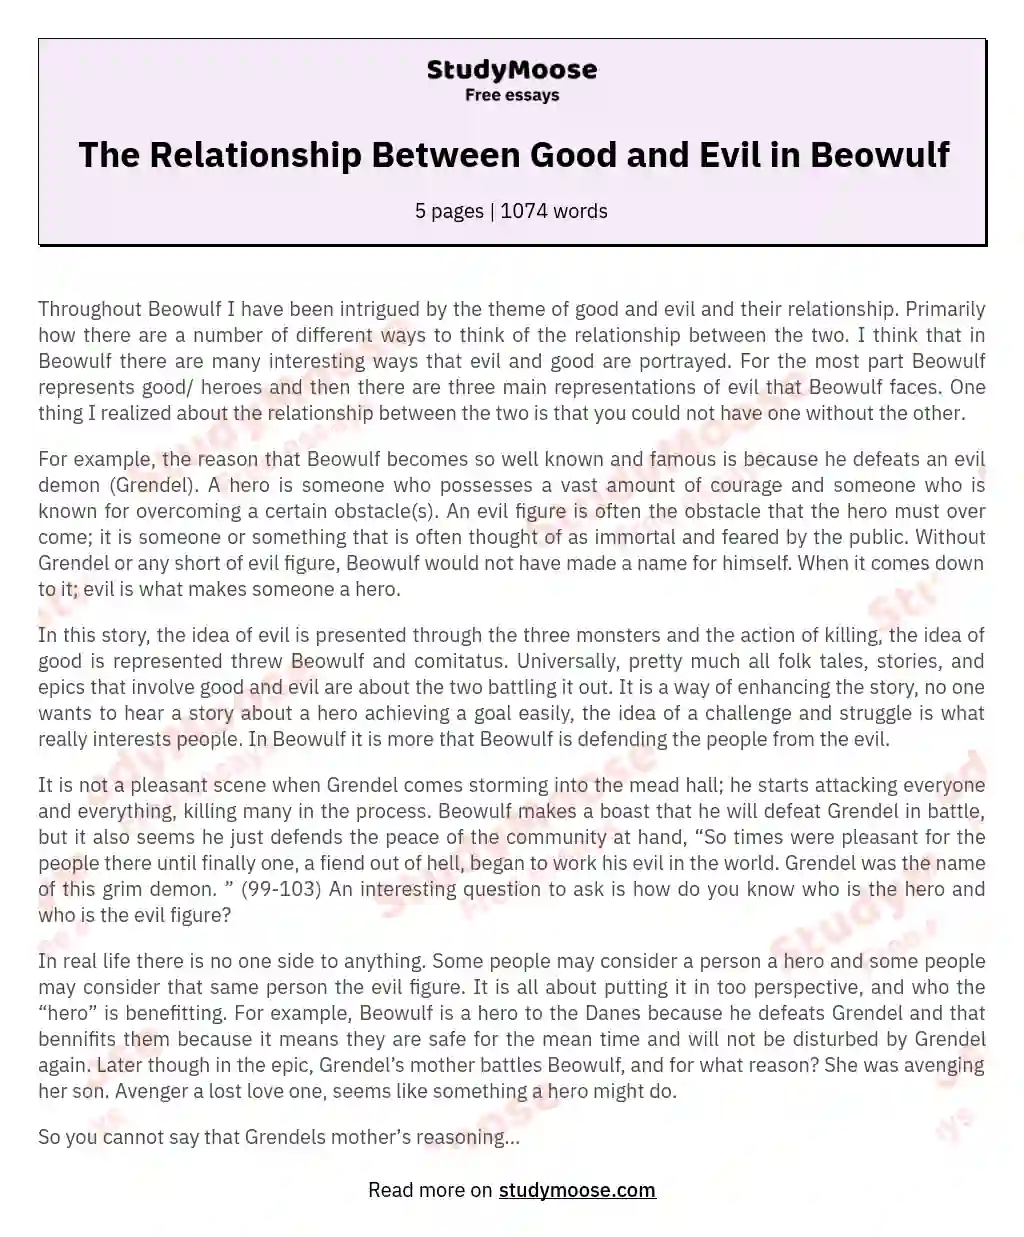 The Relationship Between Good and Evil in Beowulf